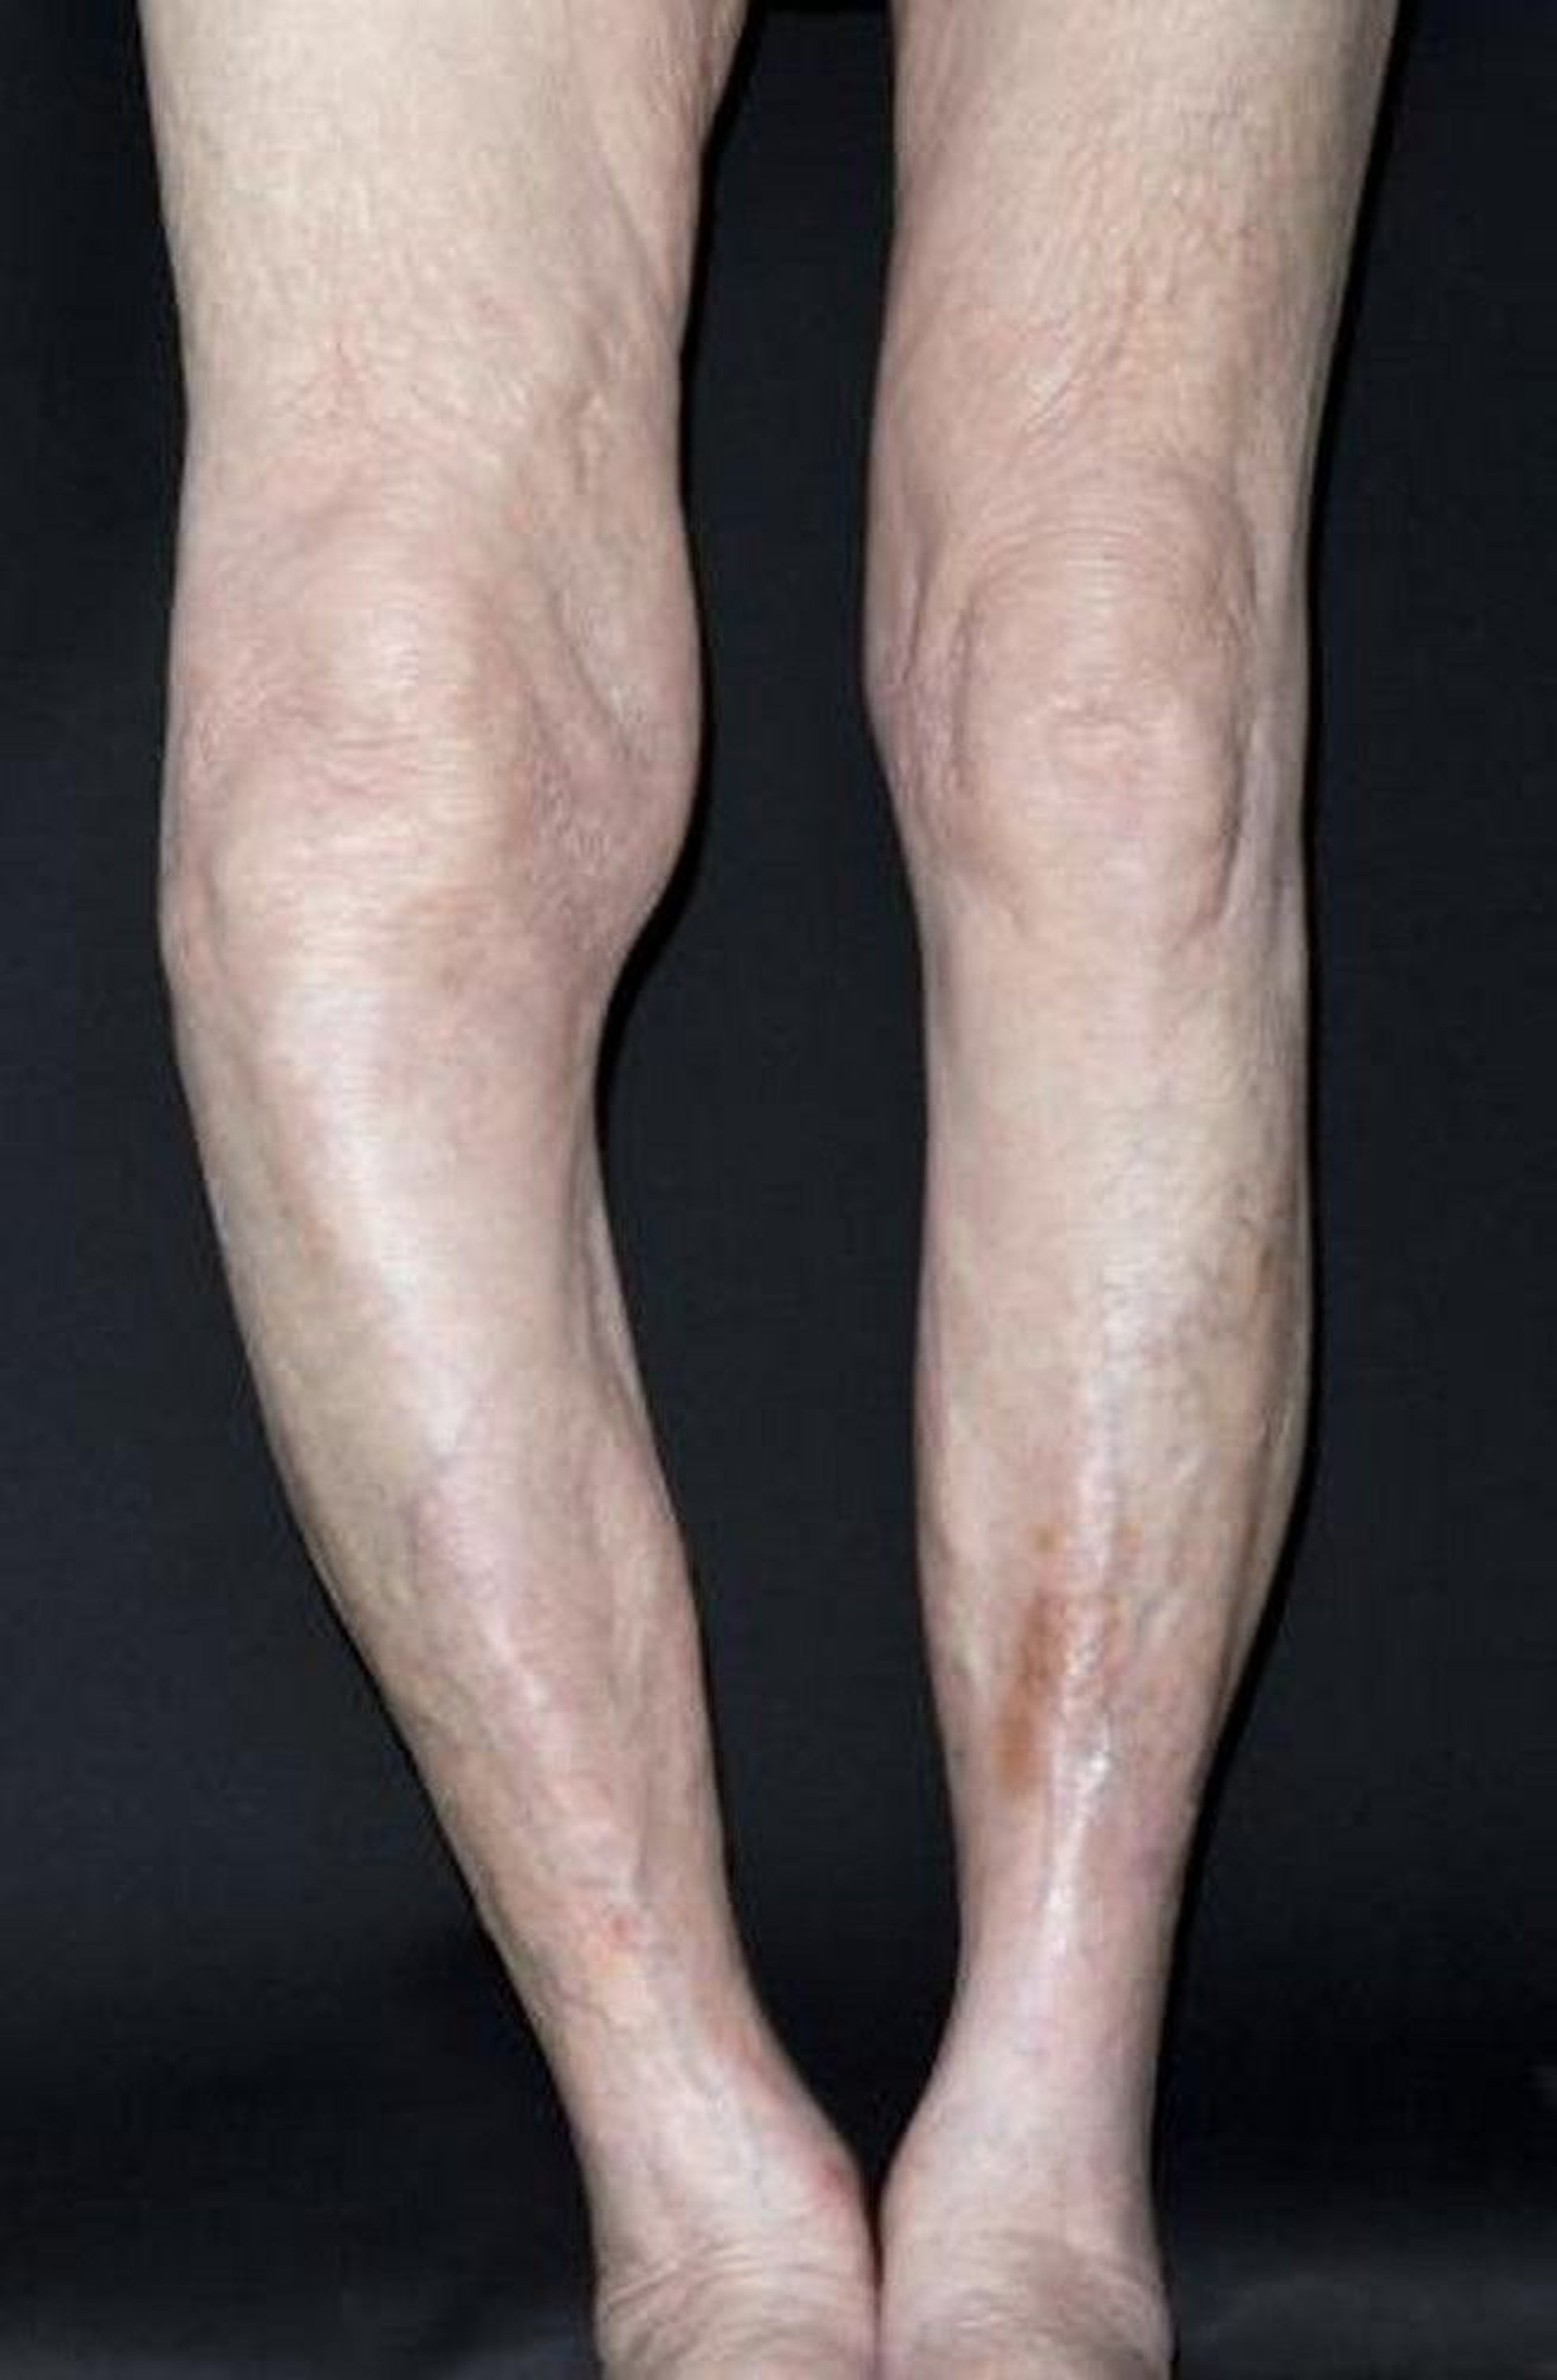 Bowing of the Tibia in Paget Disease